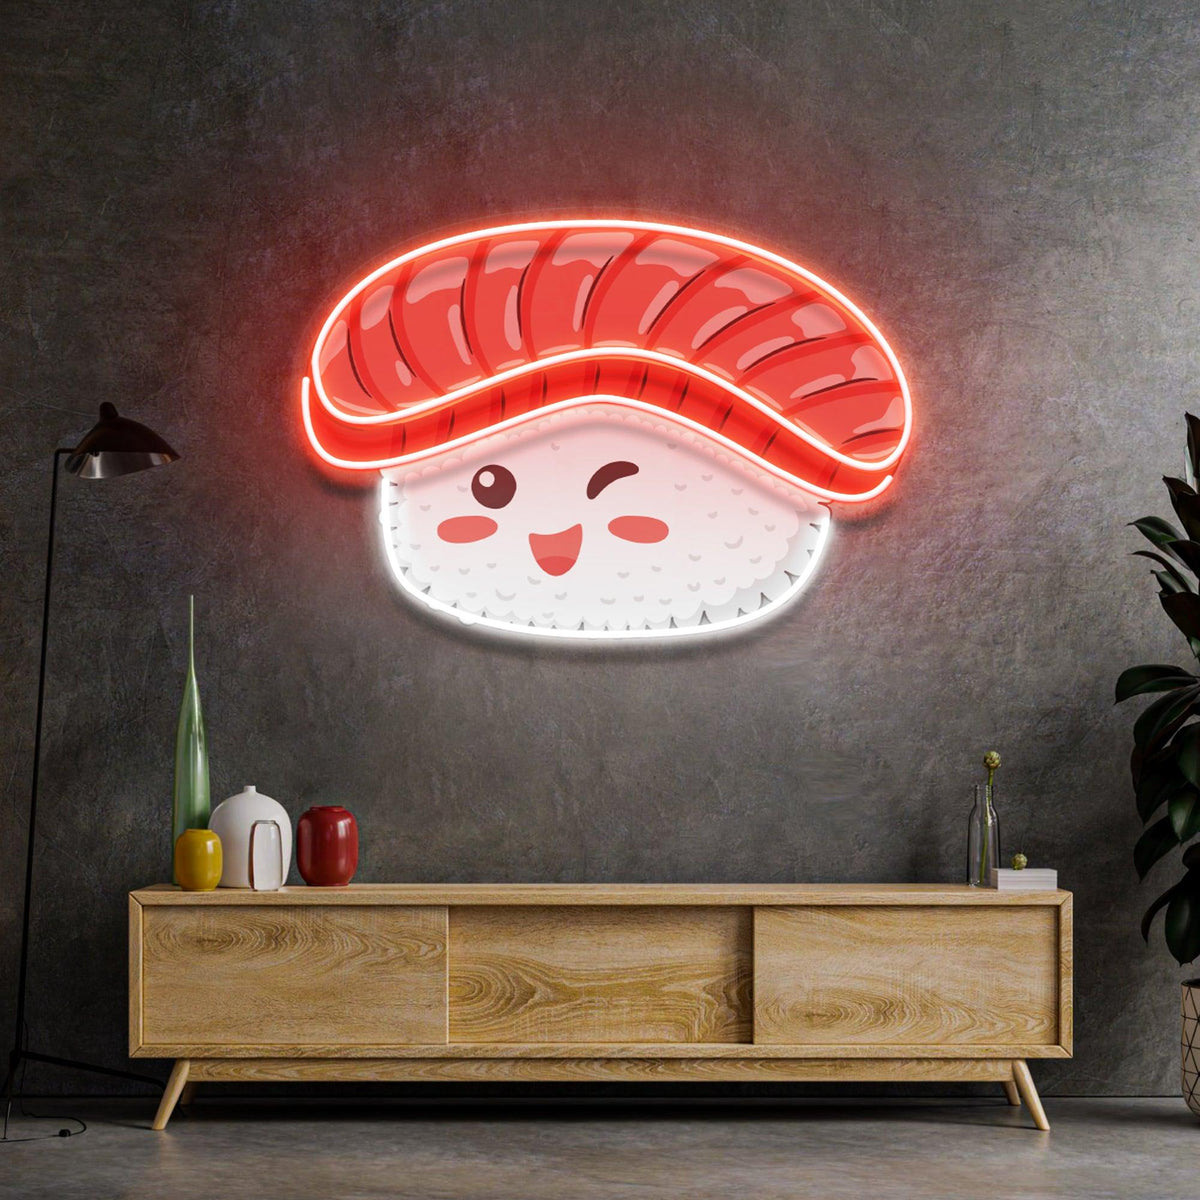 Neon sign aesthetic - Light up your space with aesthetic neon signs